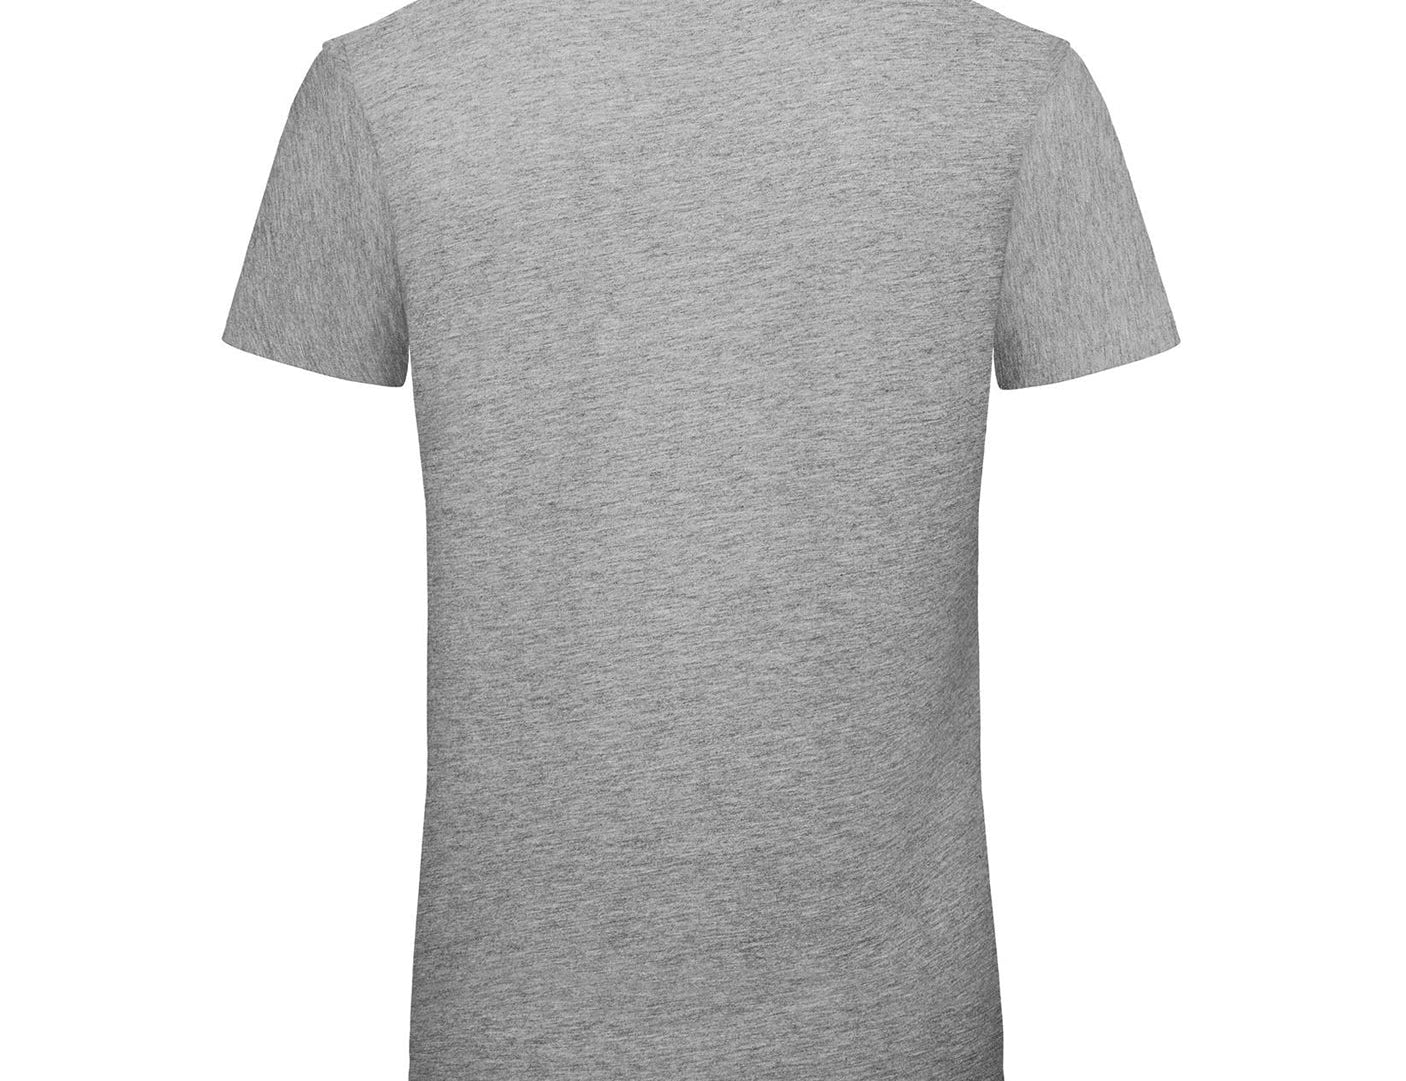 T-shirt in Heather Grey – ONETURTLE